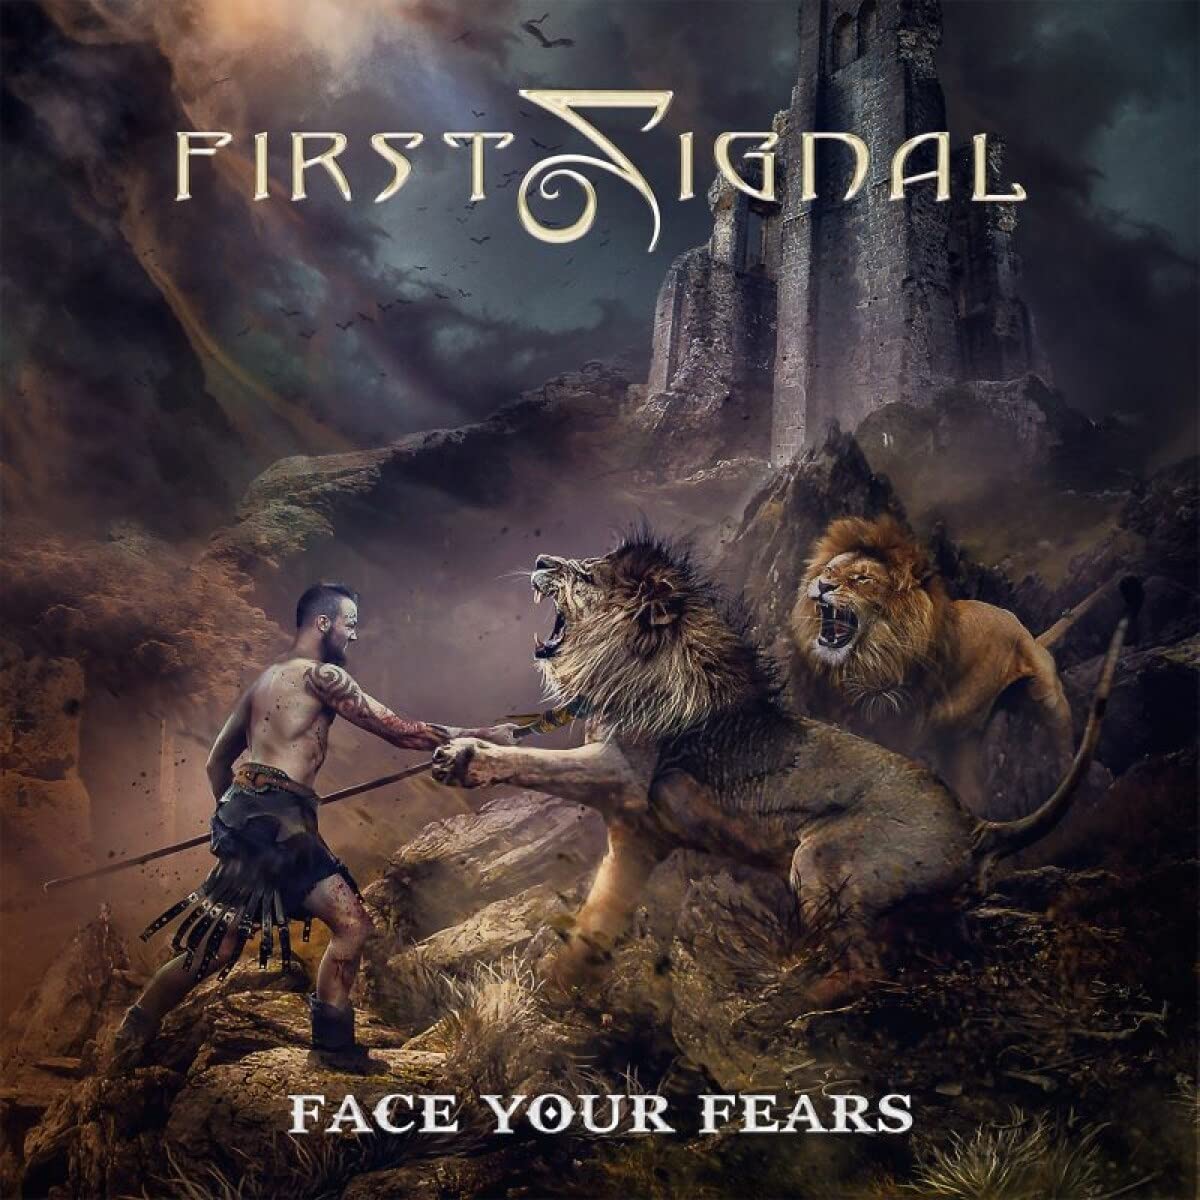 First Signal Face Your Fears CD [Importado]